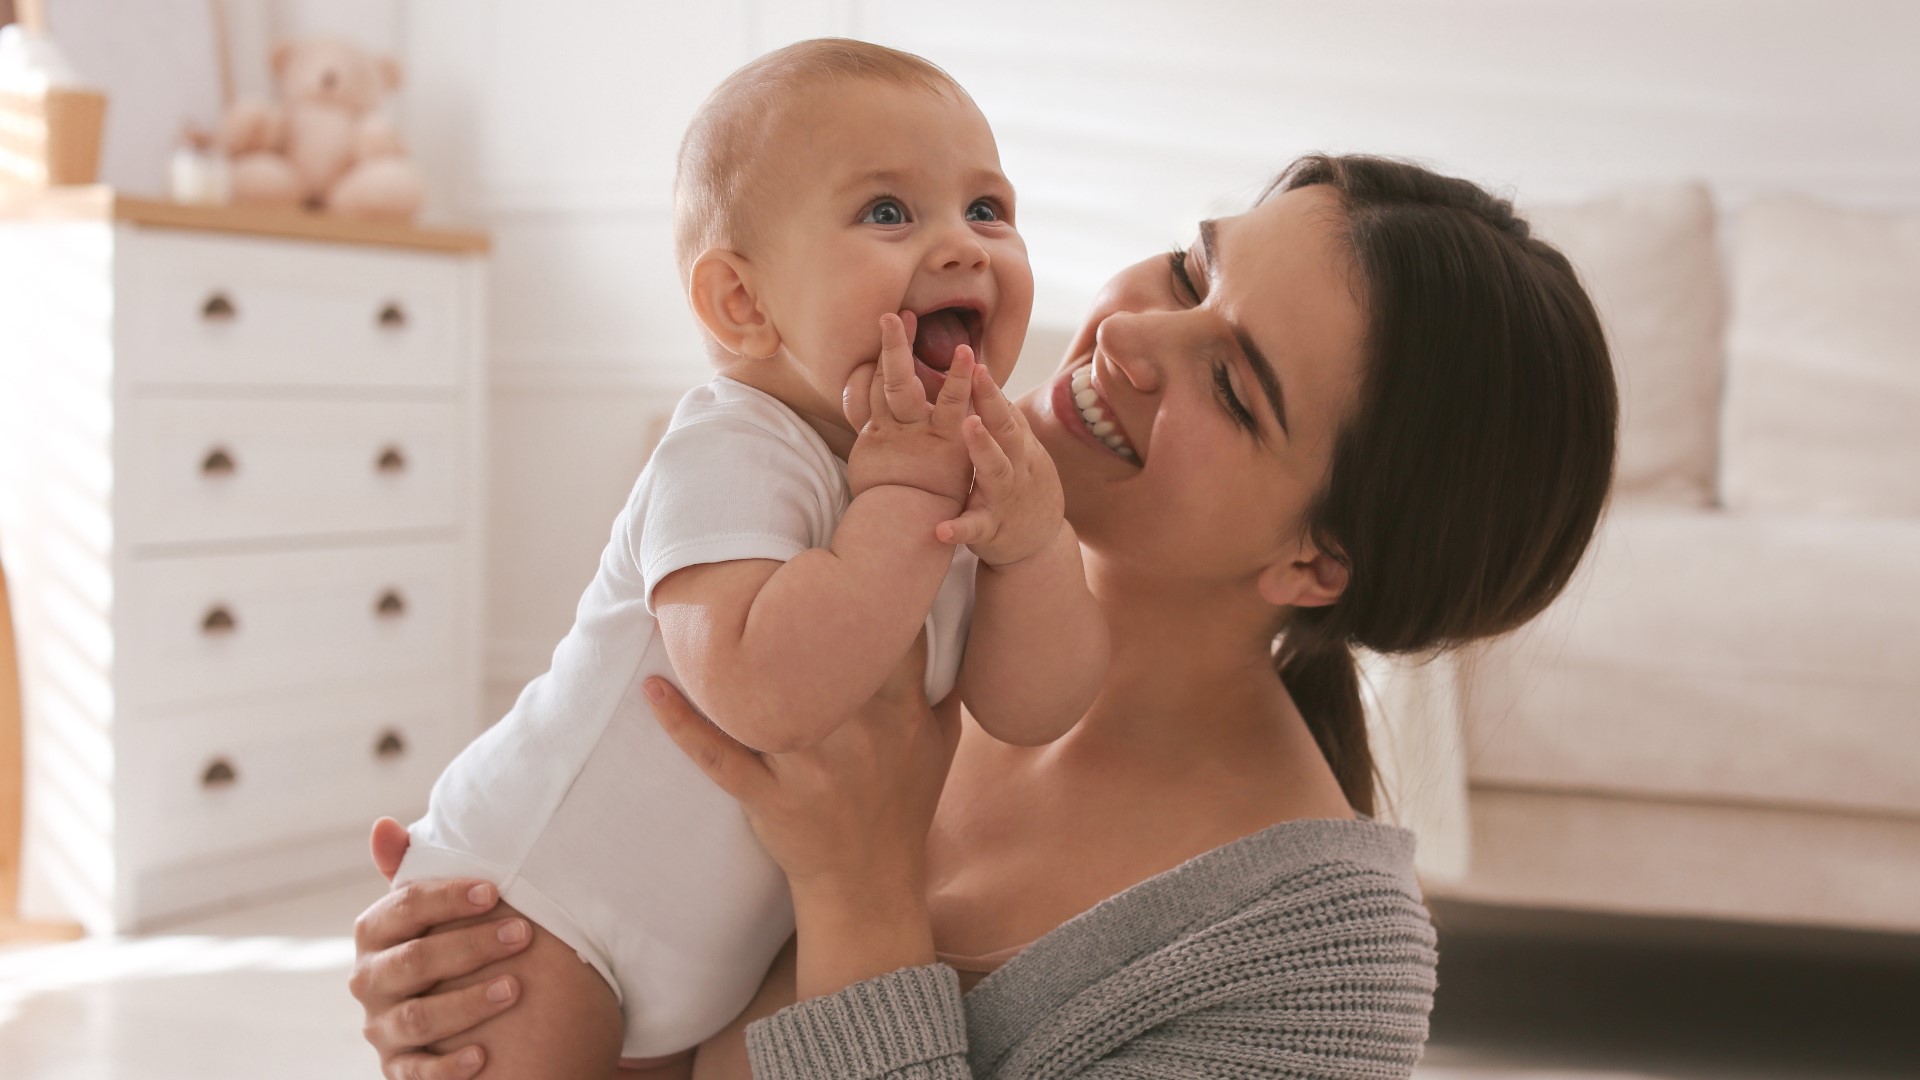 Erika Hanafin Feldhus shares tips for mothers who are returning to the workforce after taking significant time away to raise their children.